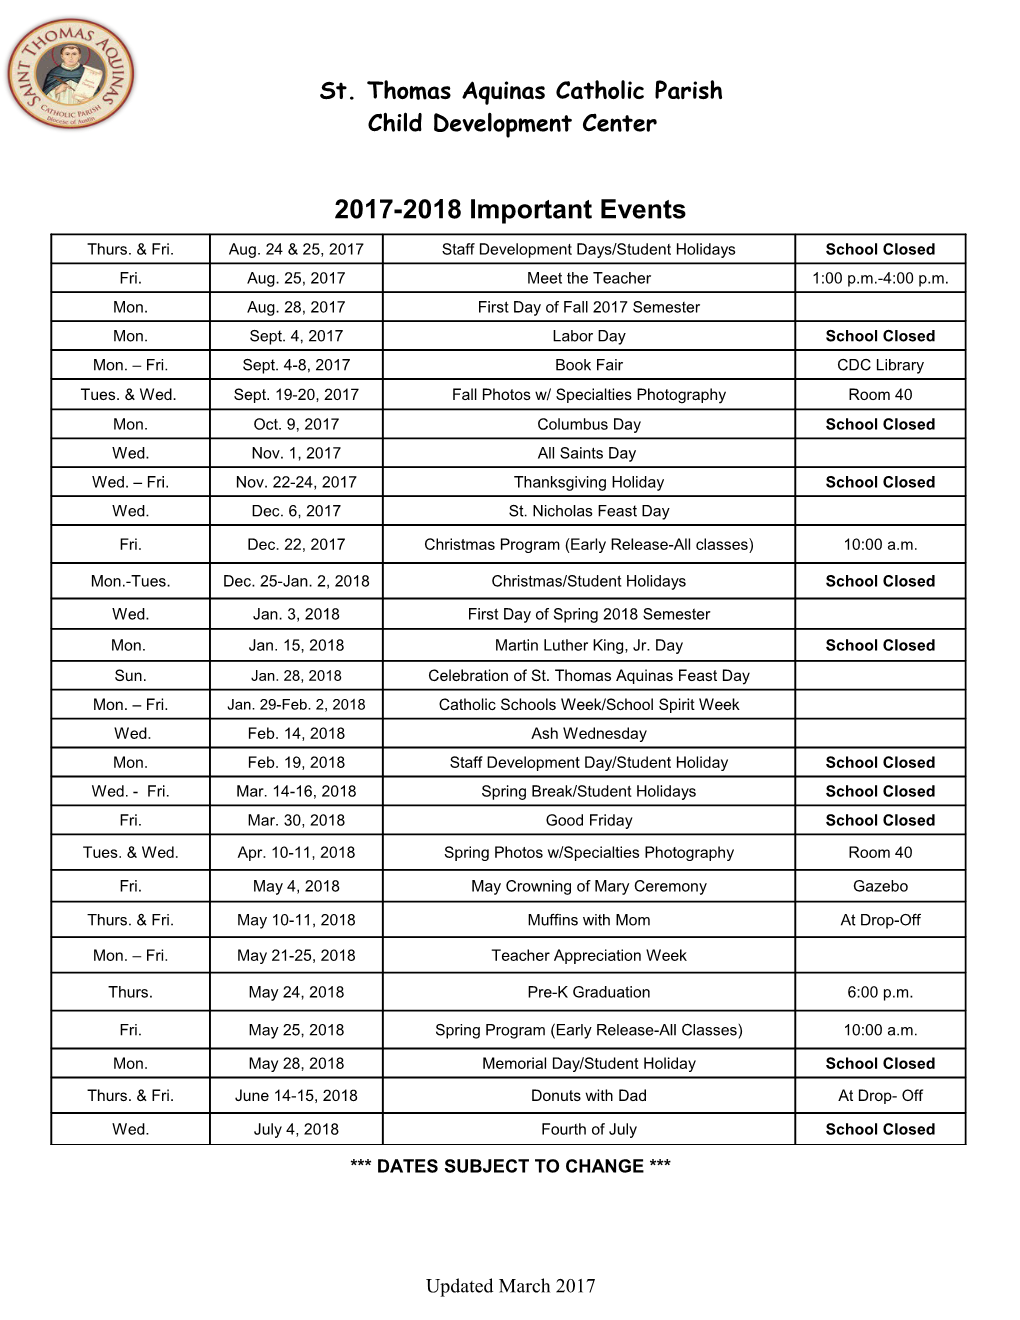 2017-2018 Important Events